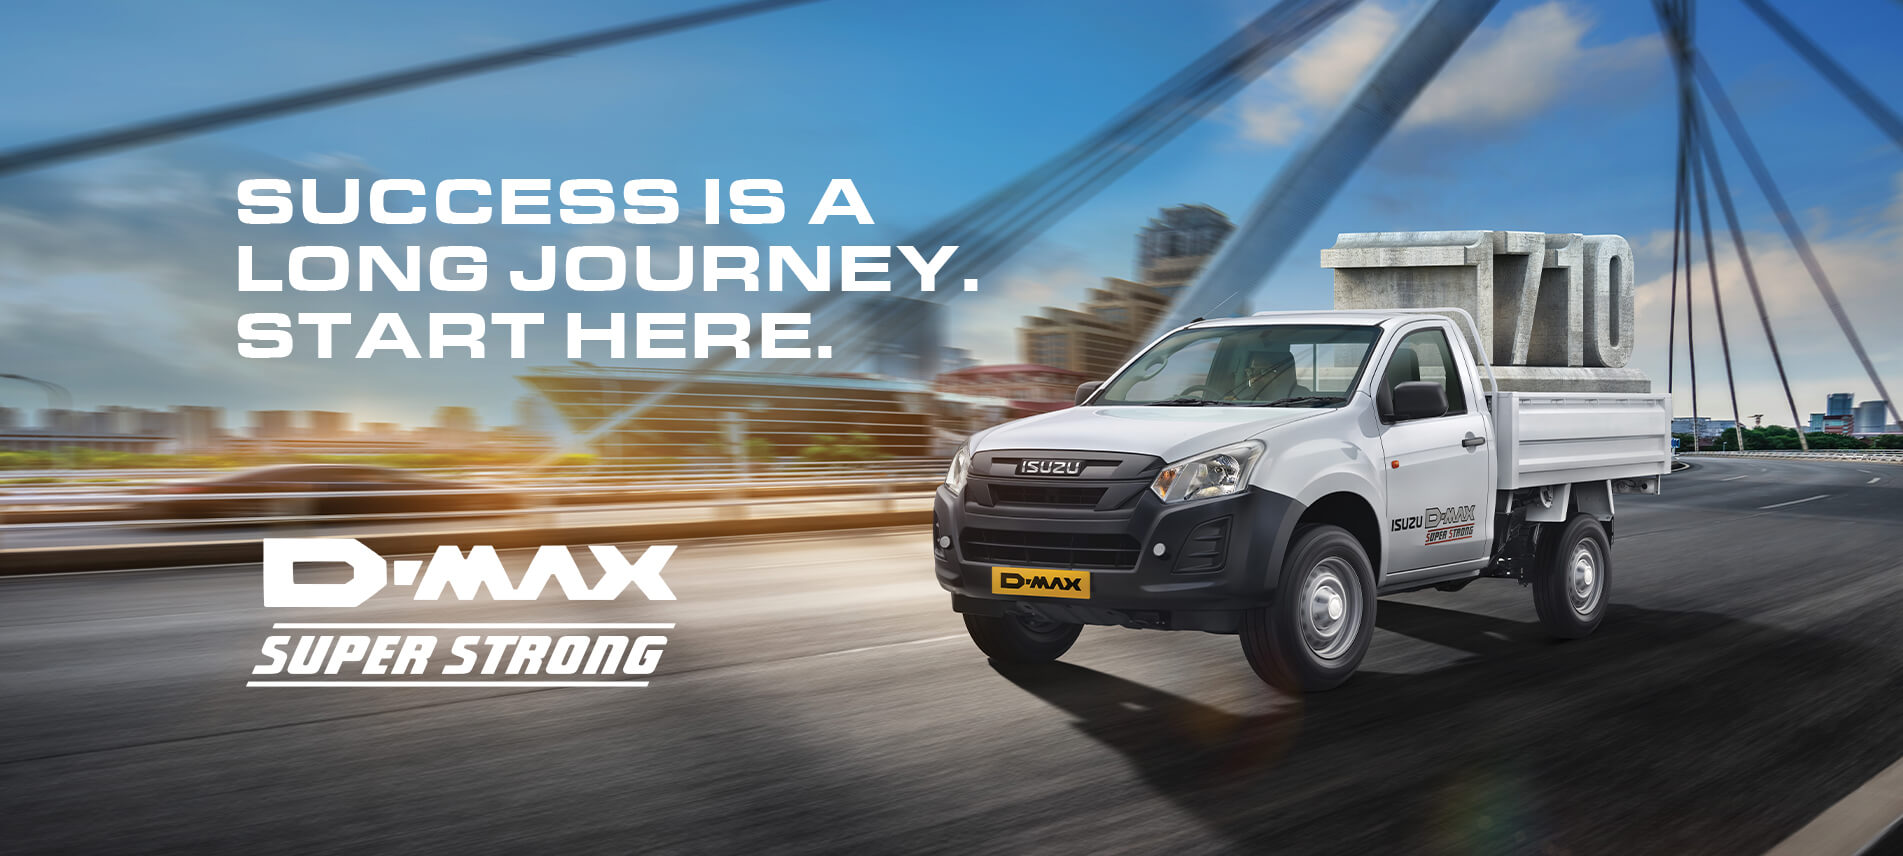 D-Max - Success is a long Journey, Start Here!